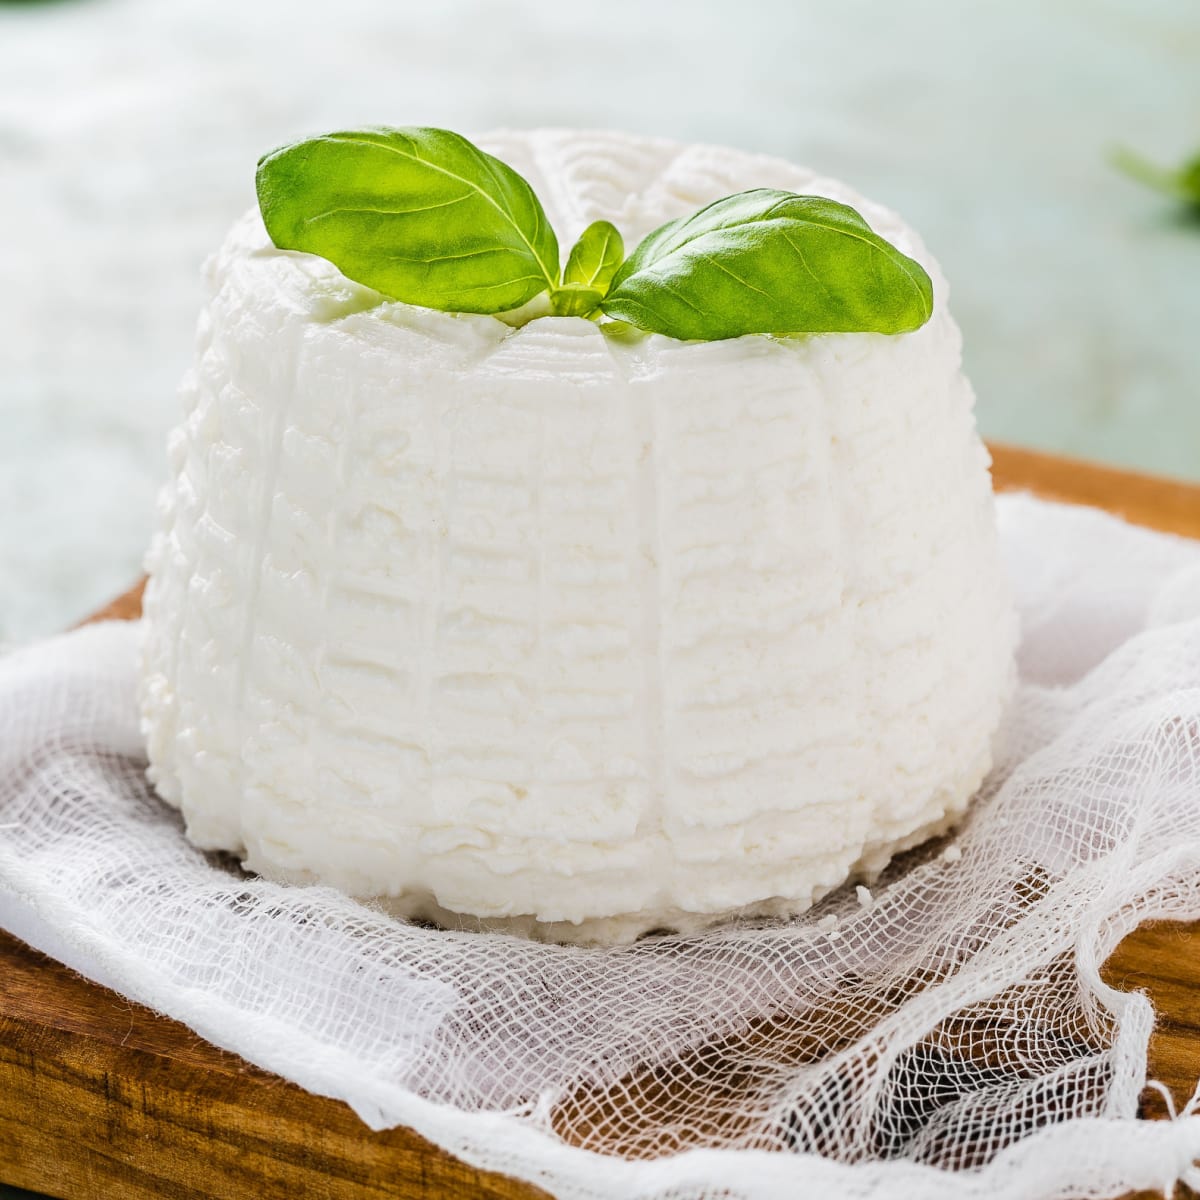 Ricotta Cheese with Basil on Top on a Wooden Cutting Board